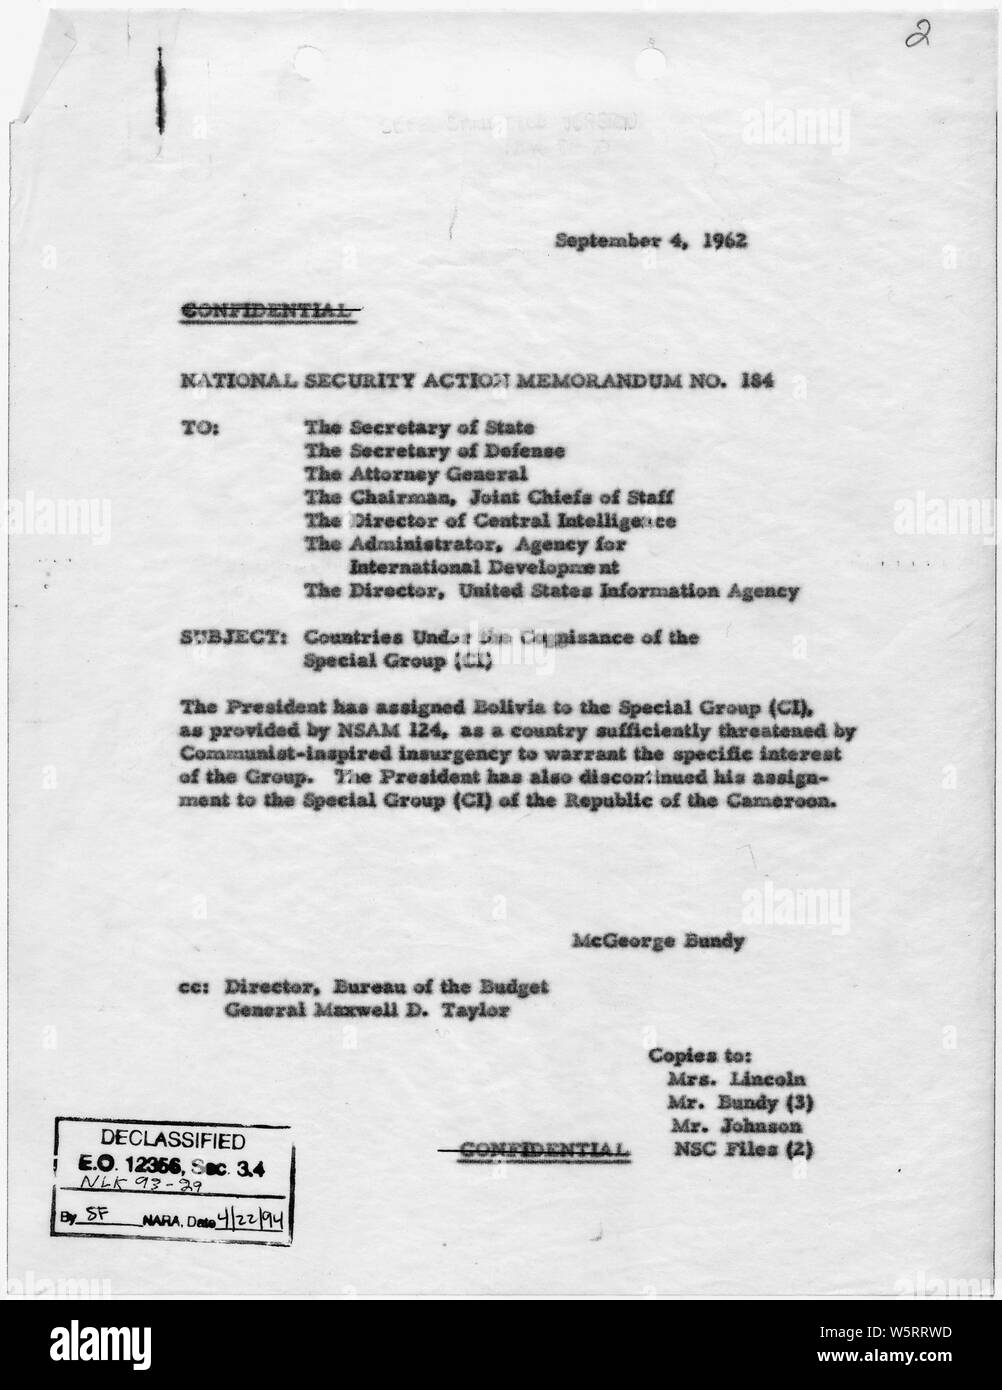 National Security Action Memorandum No. 184 Countries under the Cognizance of the Special Group; Scope and content:  Memorandum for Secretary of State and others informing them that Bolivia has been assigned to the Special Group (Counterinsurgency) Stock Photo